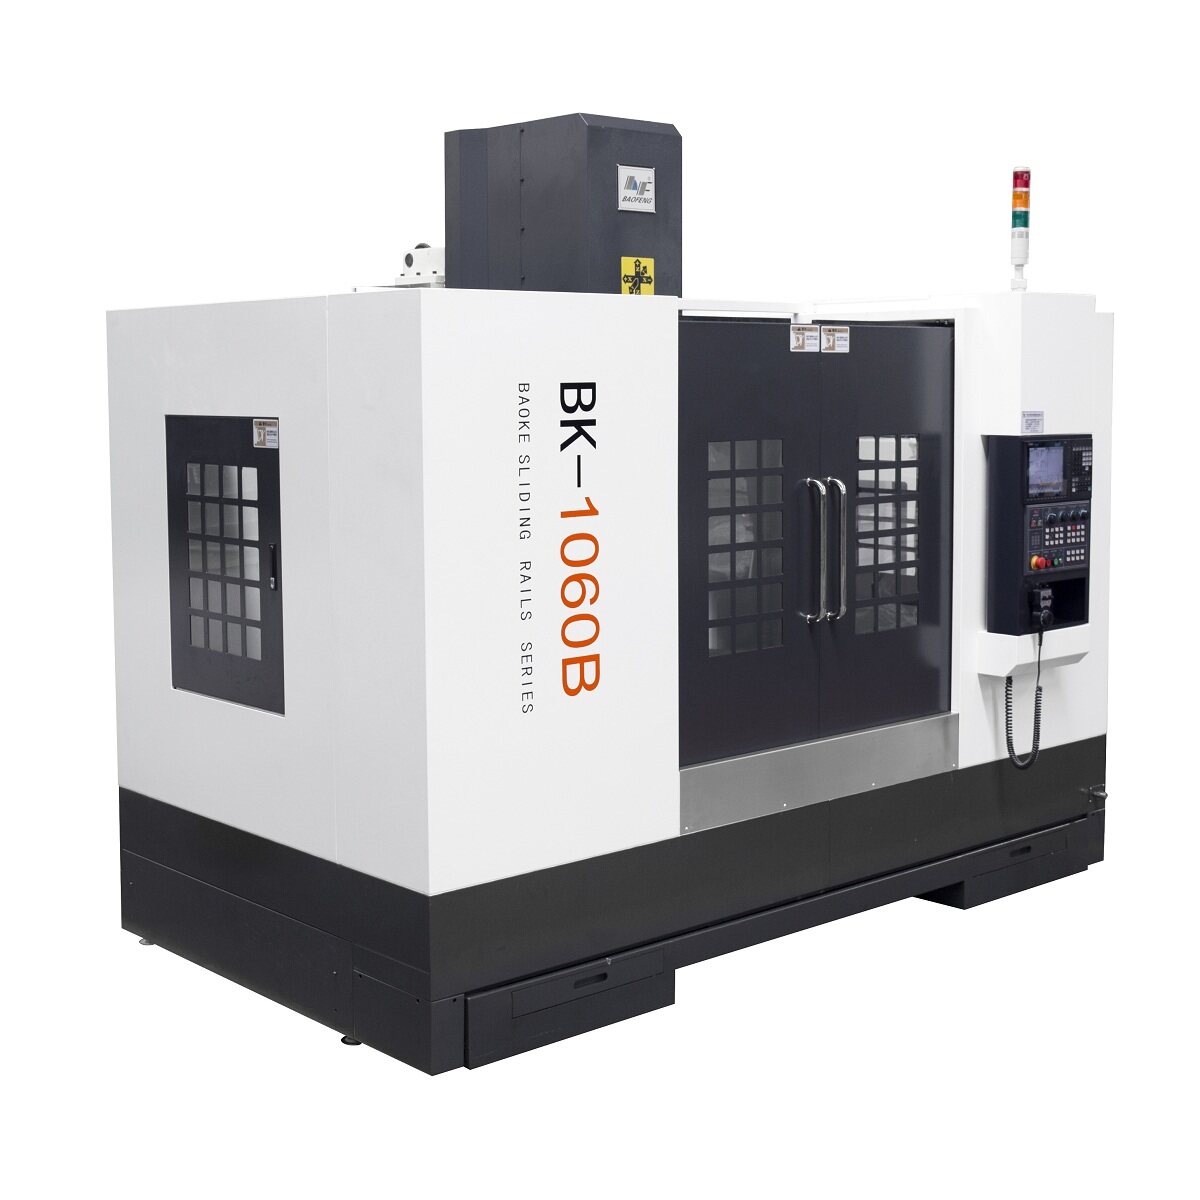 3-axis CNC Machining Centers for Milling and Drilling